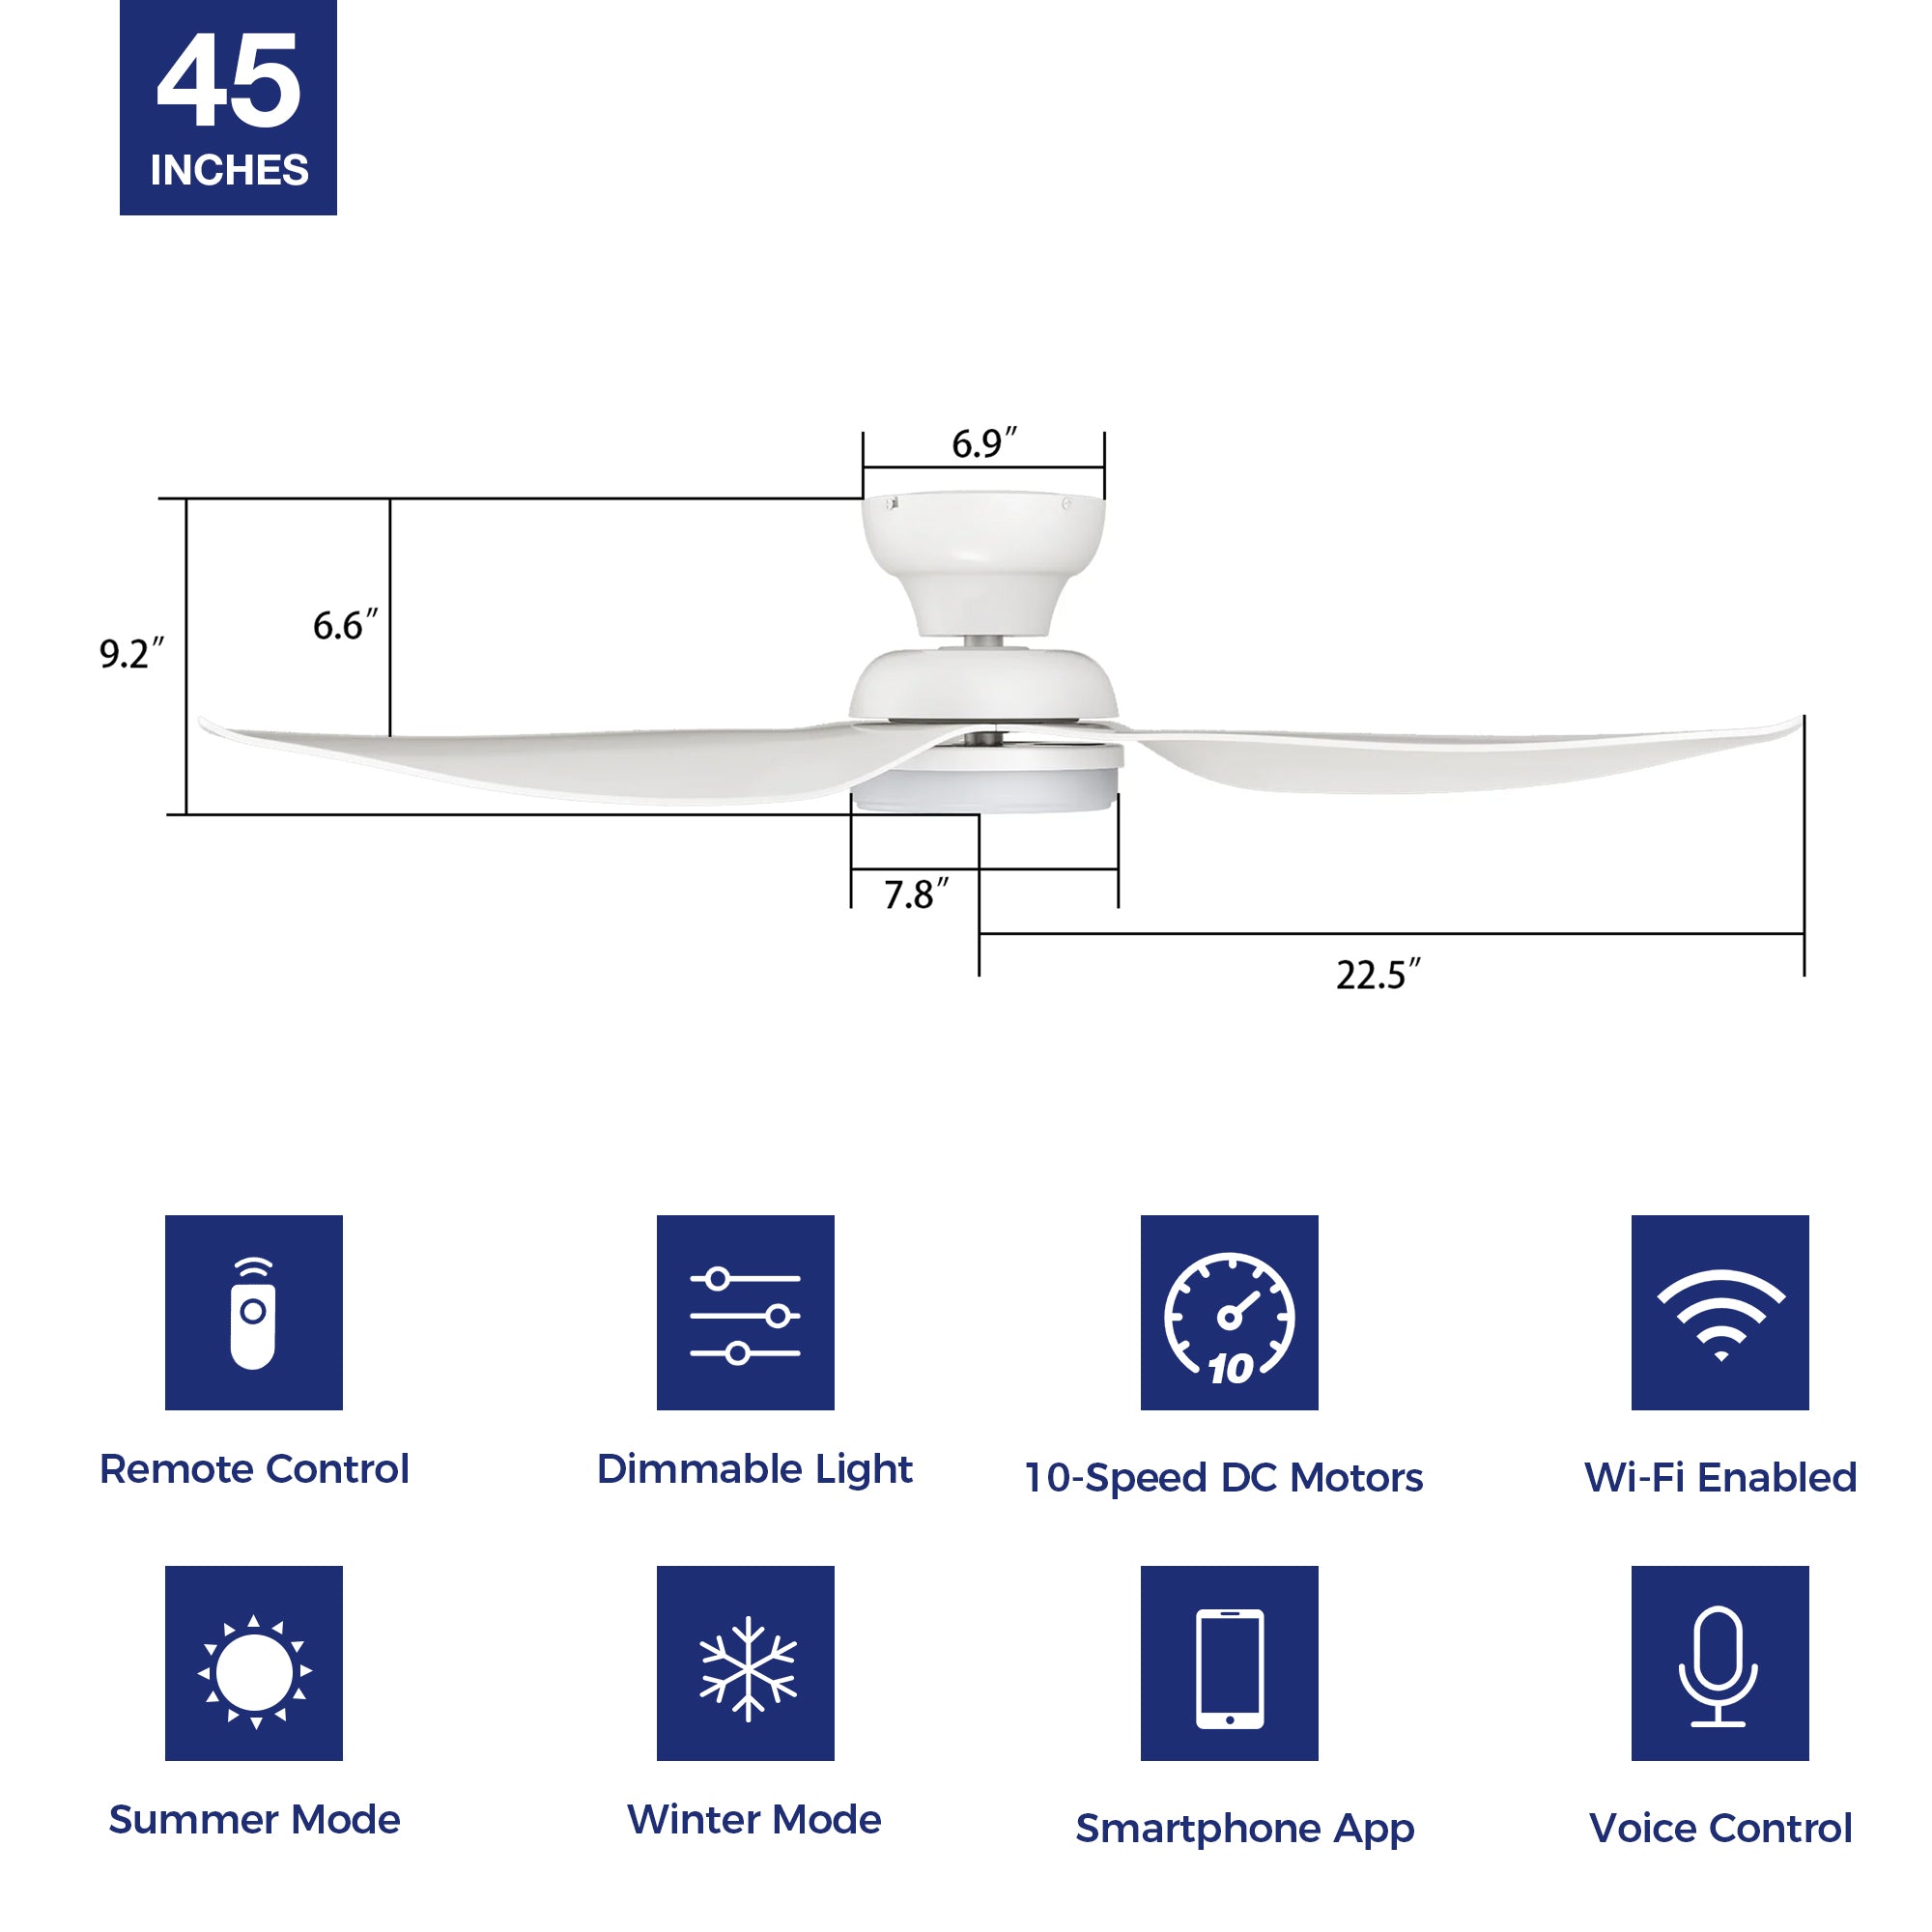 This Cerise 45&#39;&#39; smart ceiling fan keeps your space cool, bright, and stylish. It is a soft modern masterpiece perfect for your indoor living spaces. This Wifi smart ceiling fan is a simplicity designing with White finish, use very strong ABS blades and has an integrated 4000K LED daylight. The fan features Remote control, Wi-Fi apps, Siri Shortcut and Voice control technology (compatible with Amazon Alexa and Google Home Assistant ) to set fan preferences.